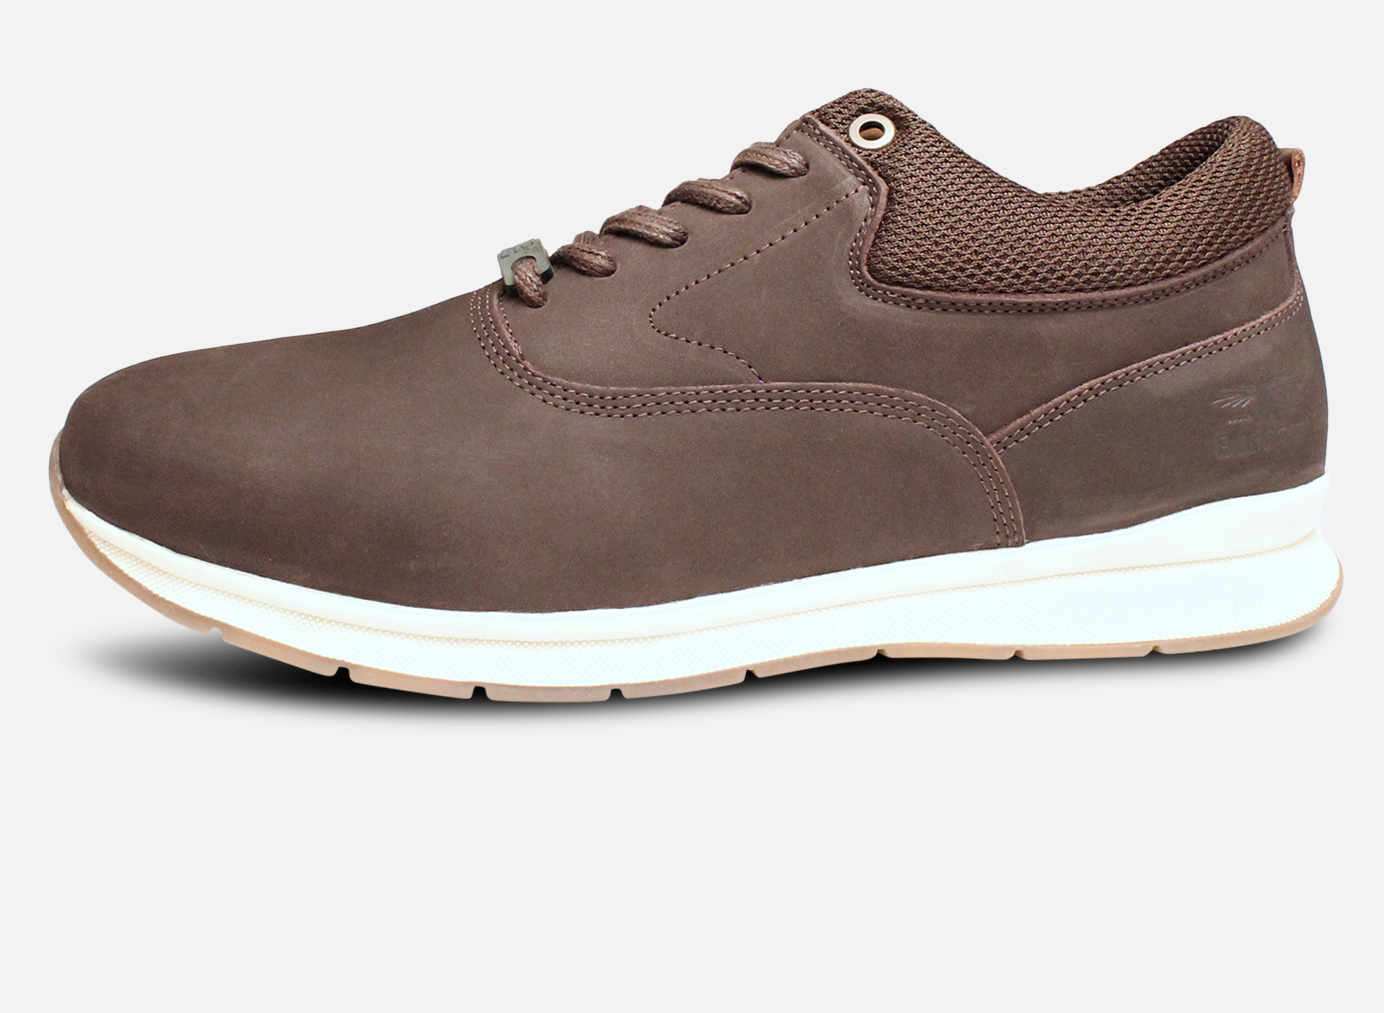 Barbour Designer Langley II Training Shoes in Waxy Brown